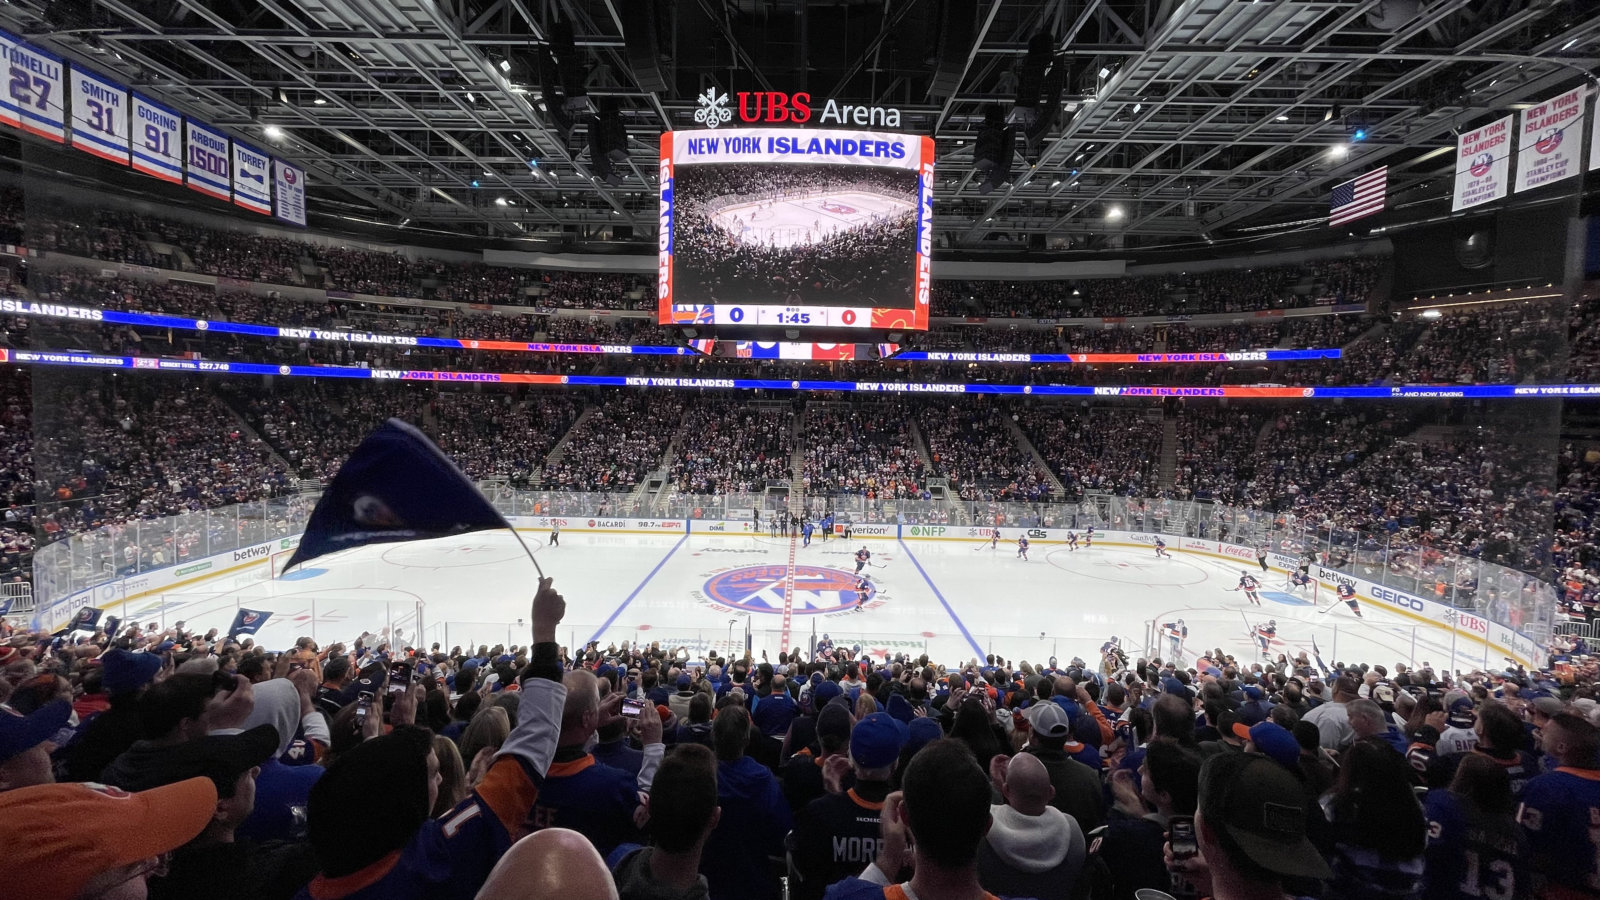 home, Islanders fans Here’s the complete 202122 UBS Arena